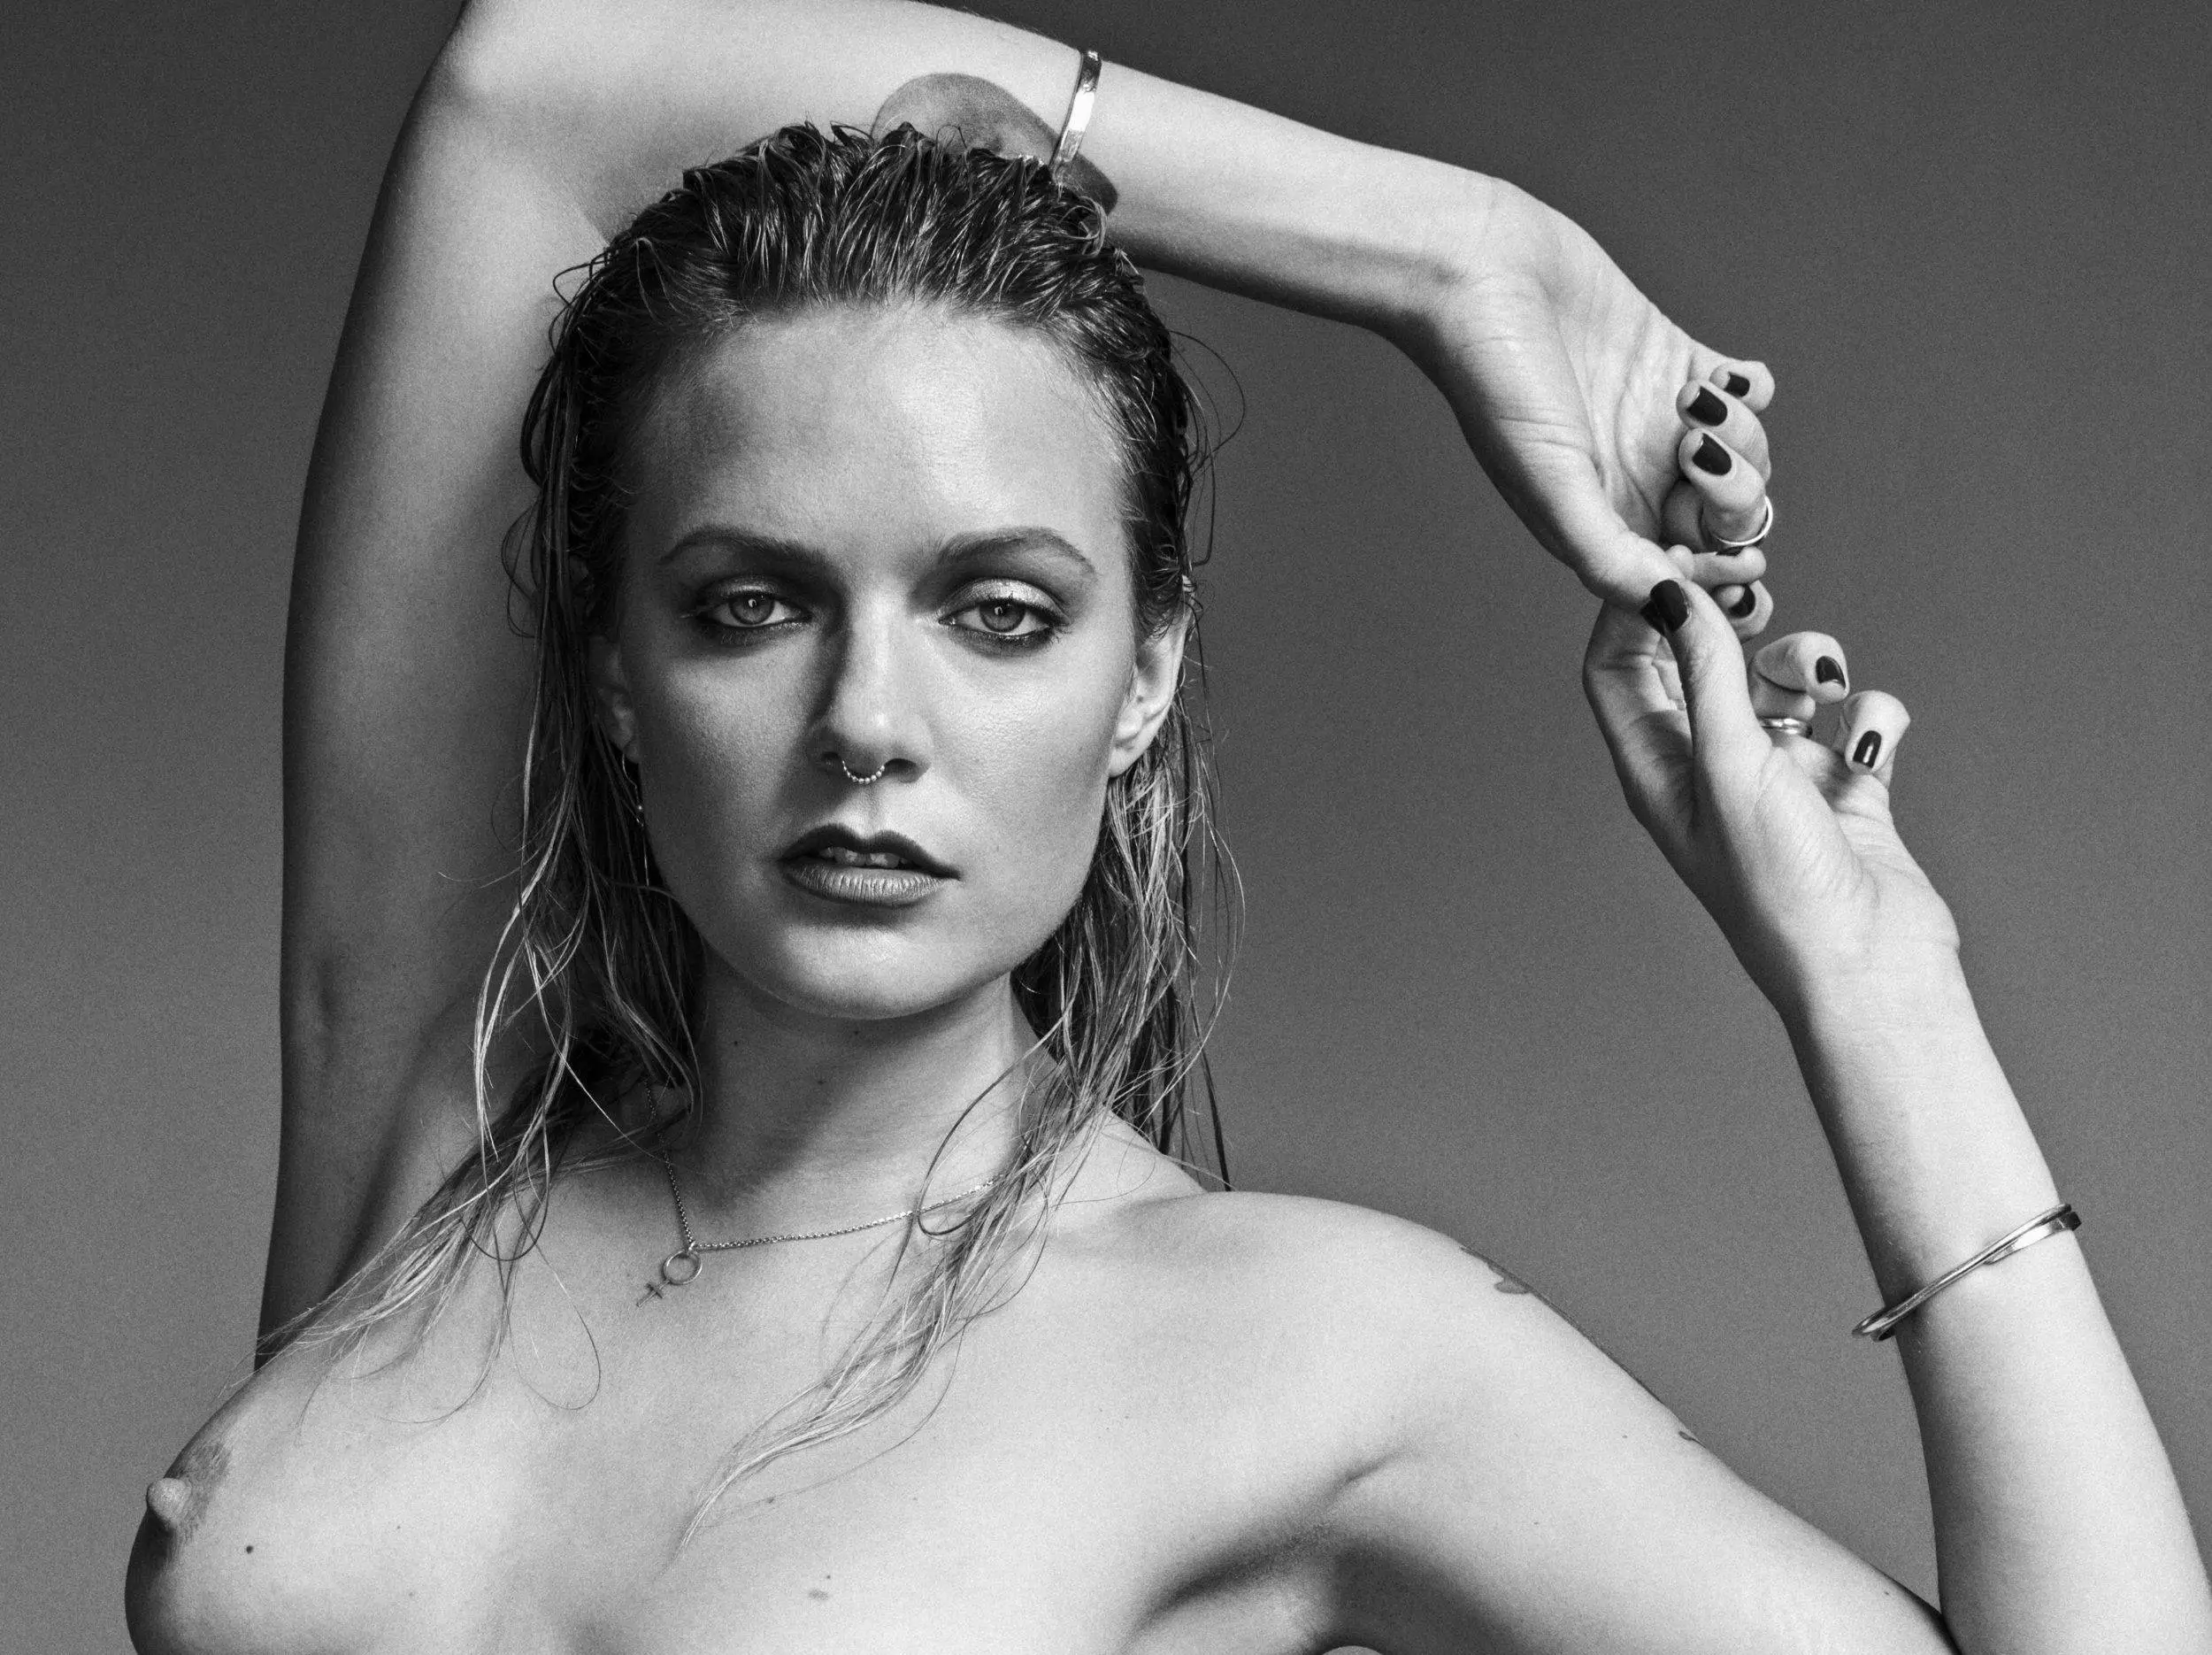 Tove Lo by Victoria Stevens for FAULT Magazine #24.